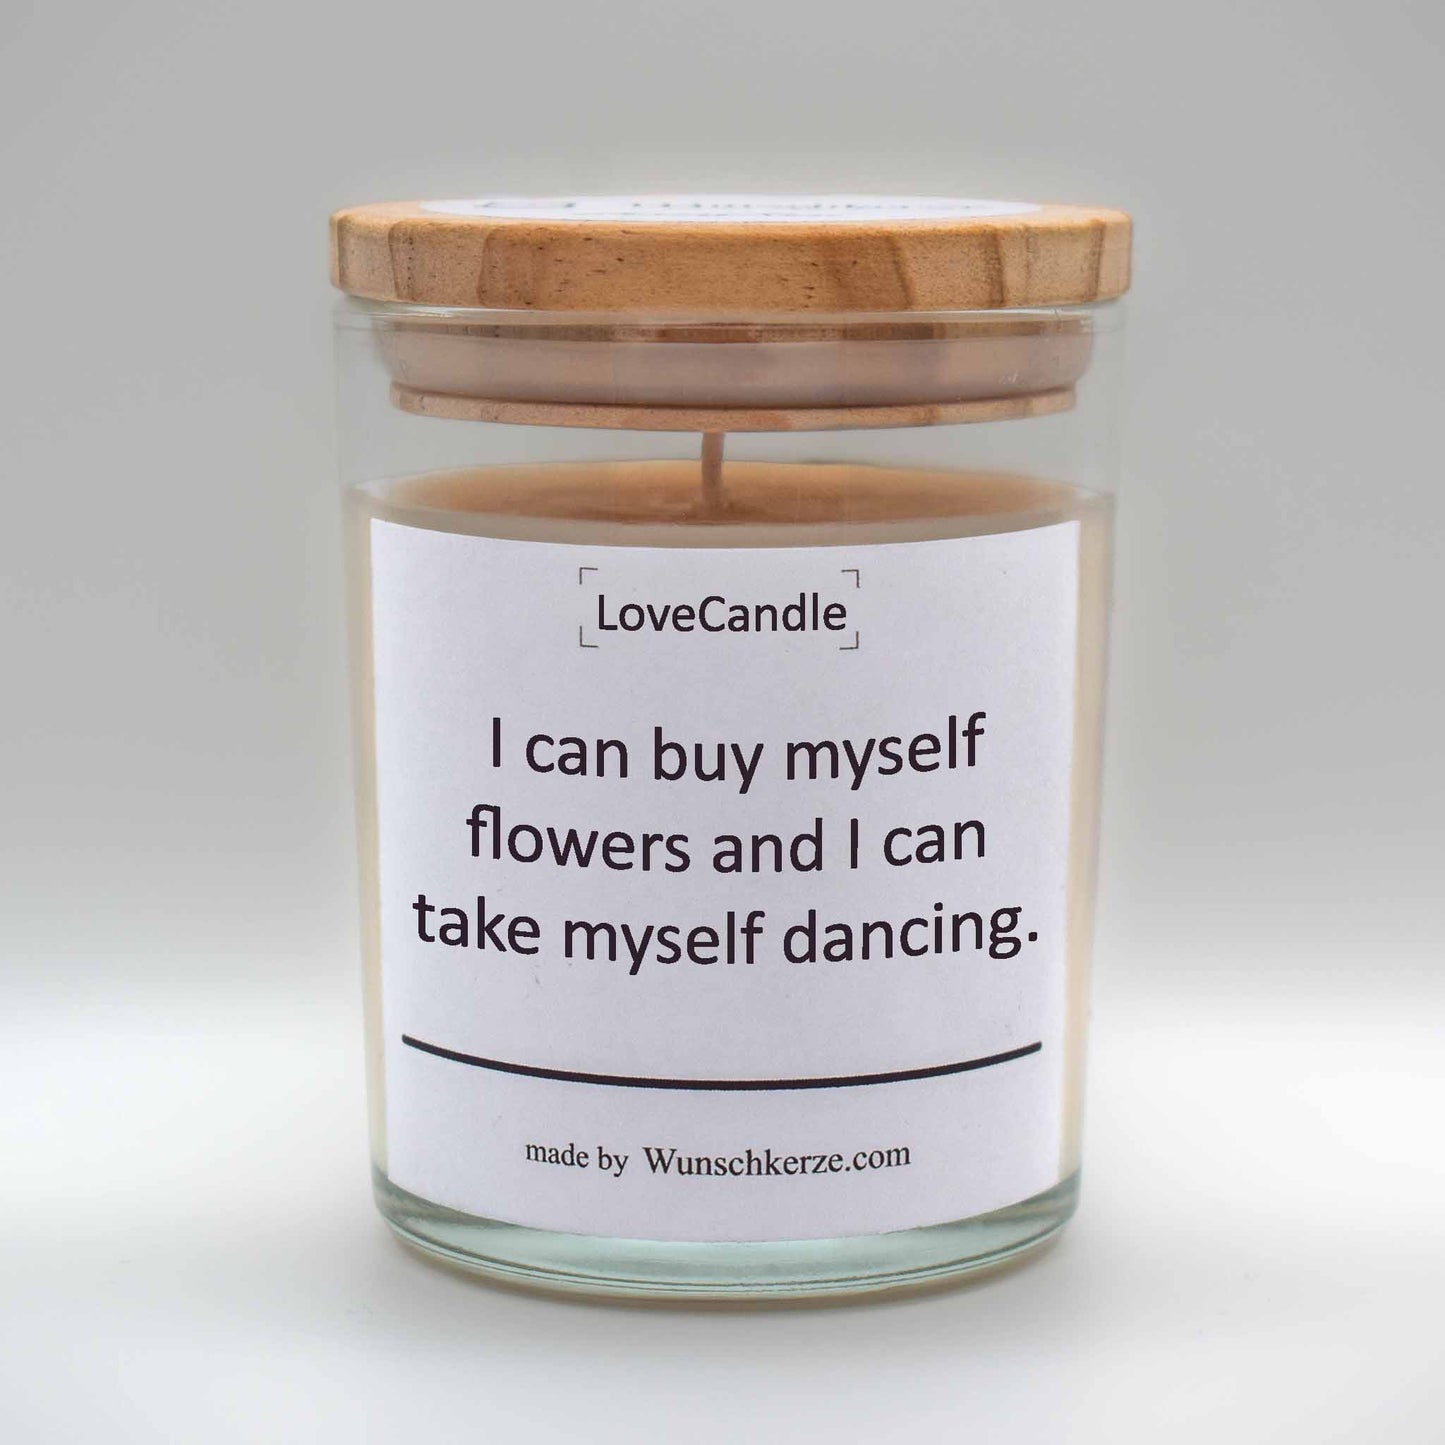 LoveCandle - I can buy myself flowers and I can take myself dancing.